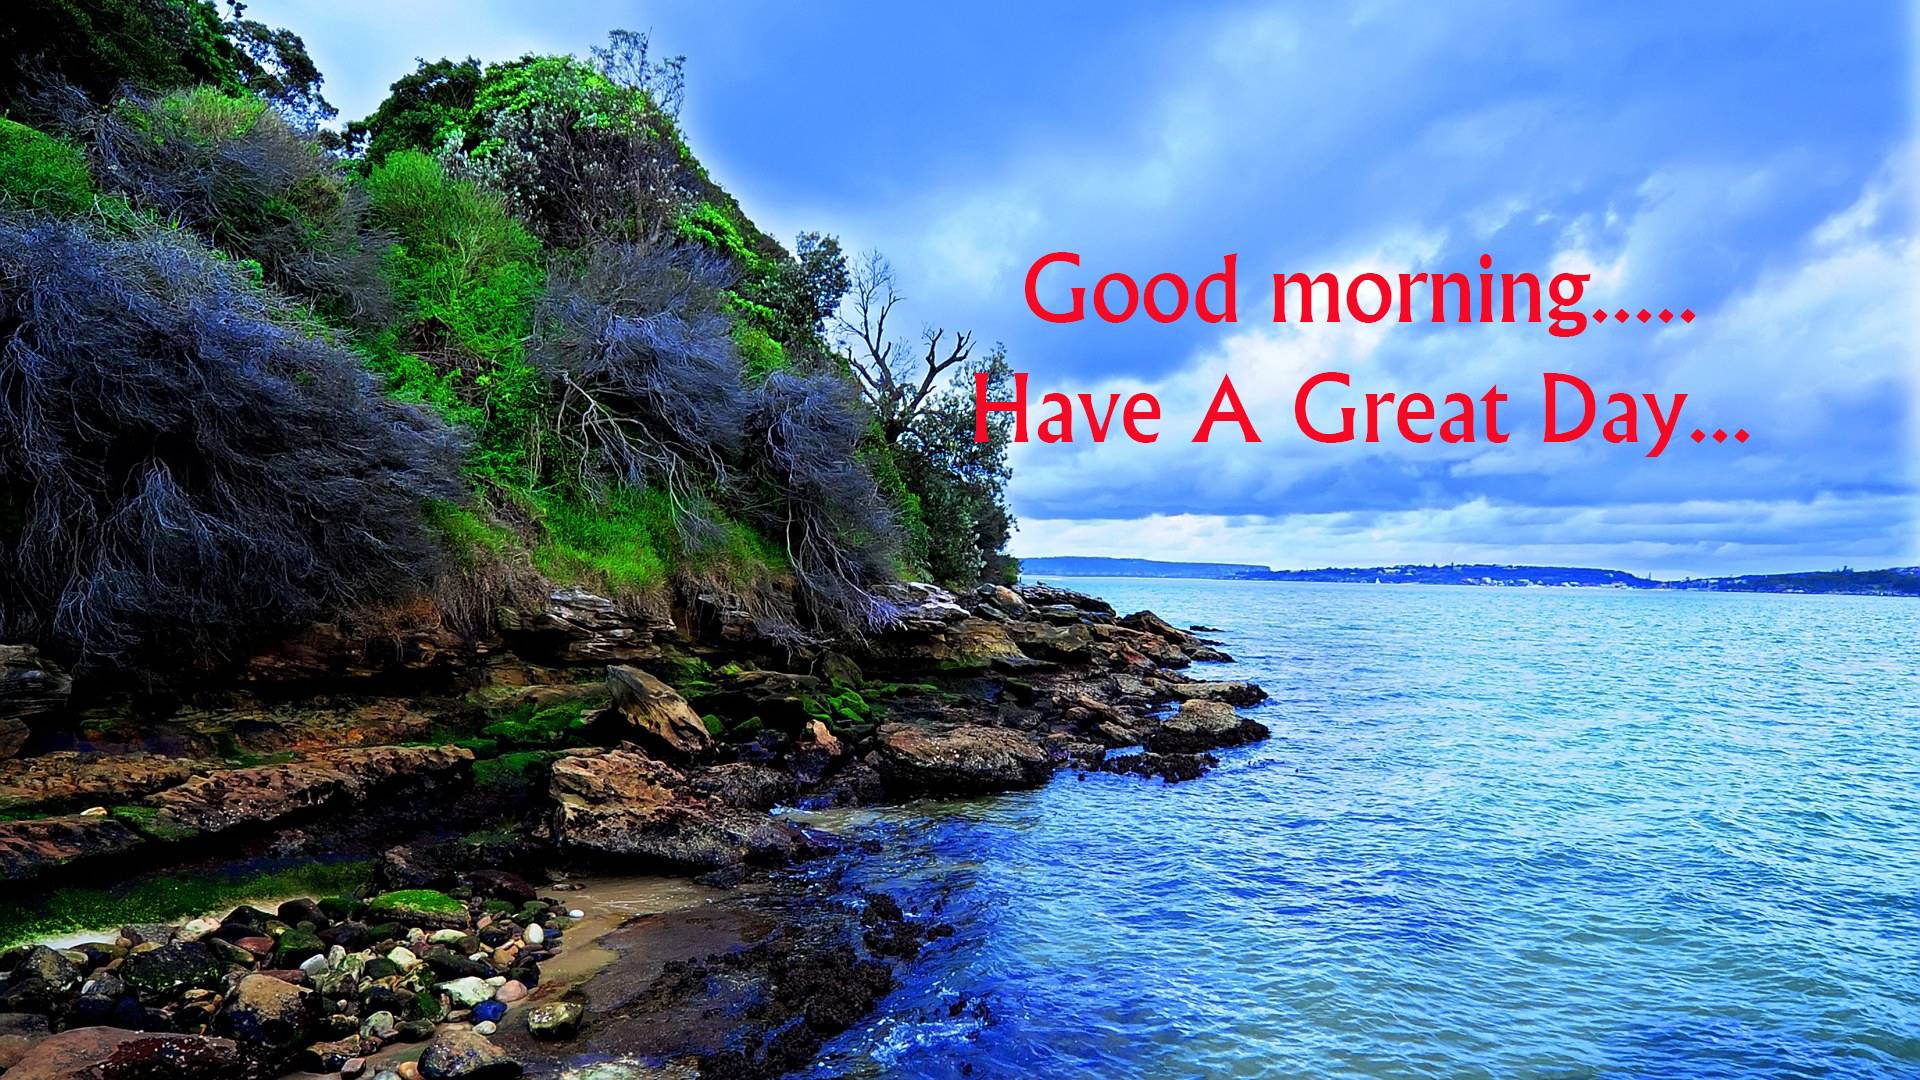 Good Morning Wishes Pictures, Image